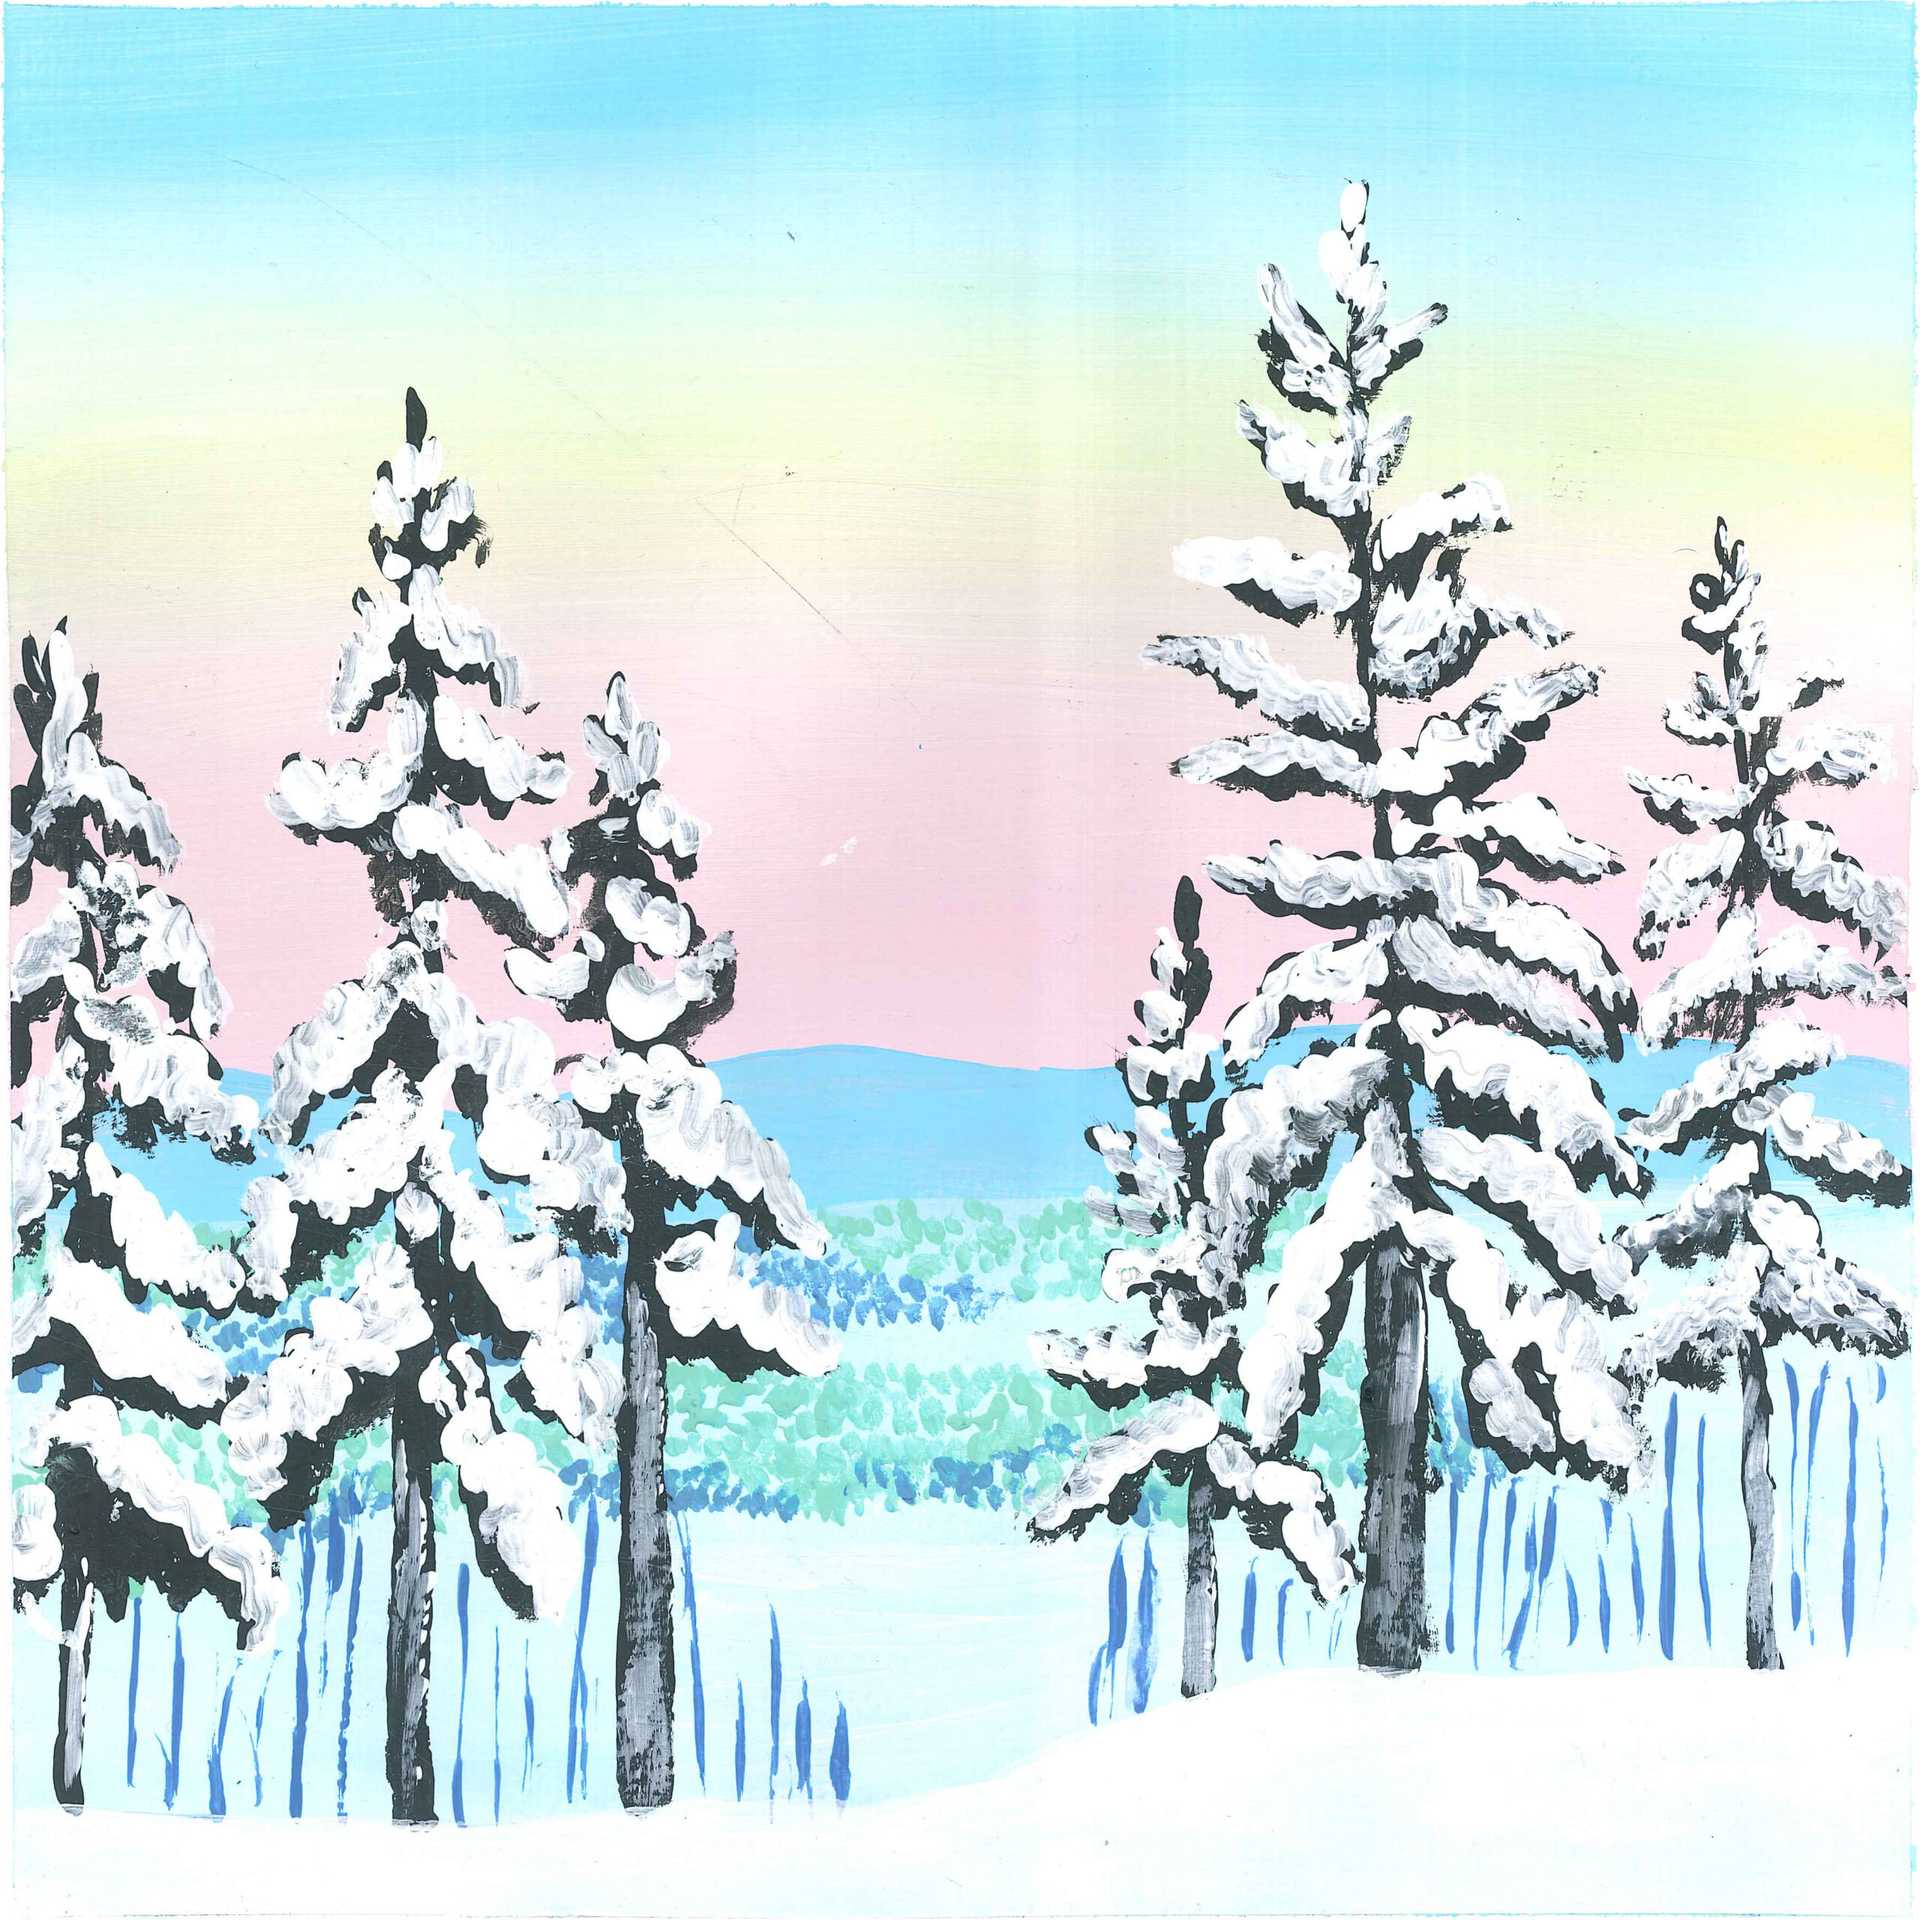 Creaking Trees in Winter - nature landscape painting - earth.fm